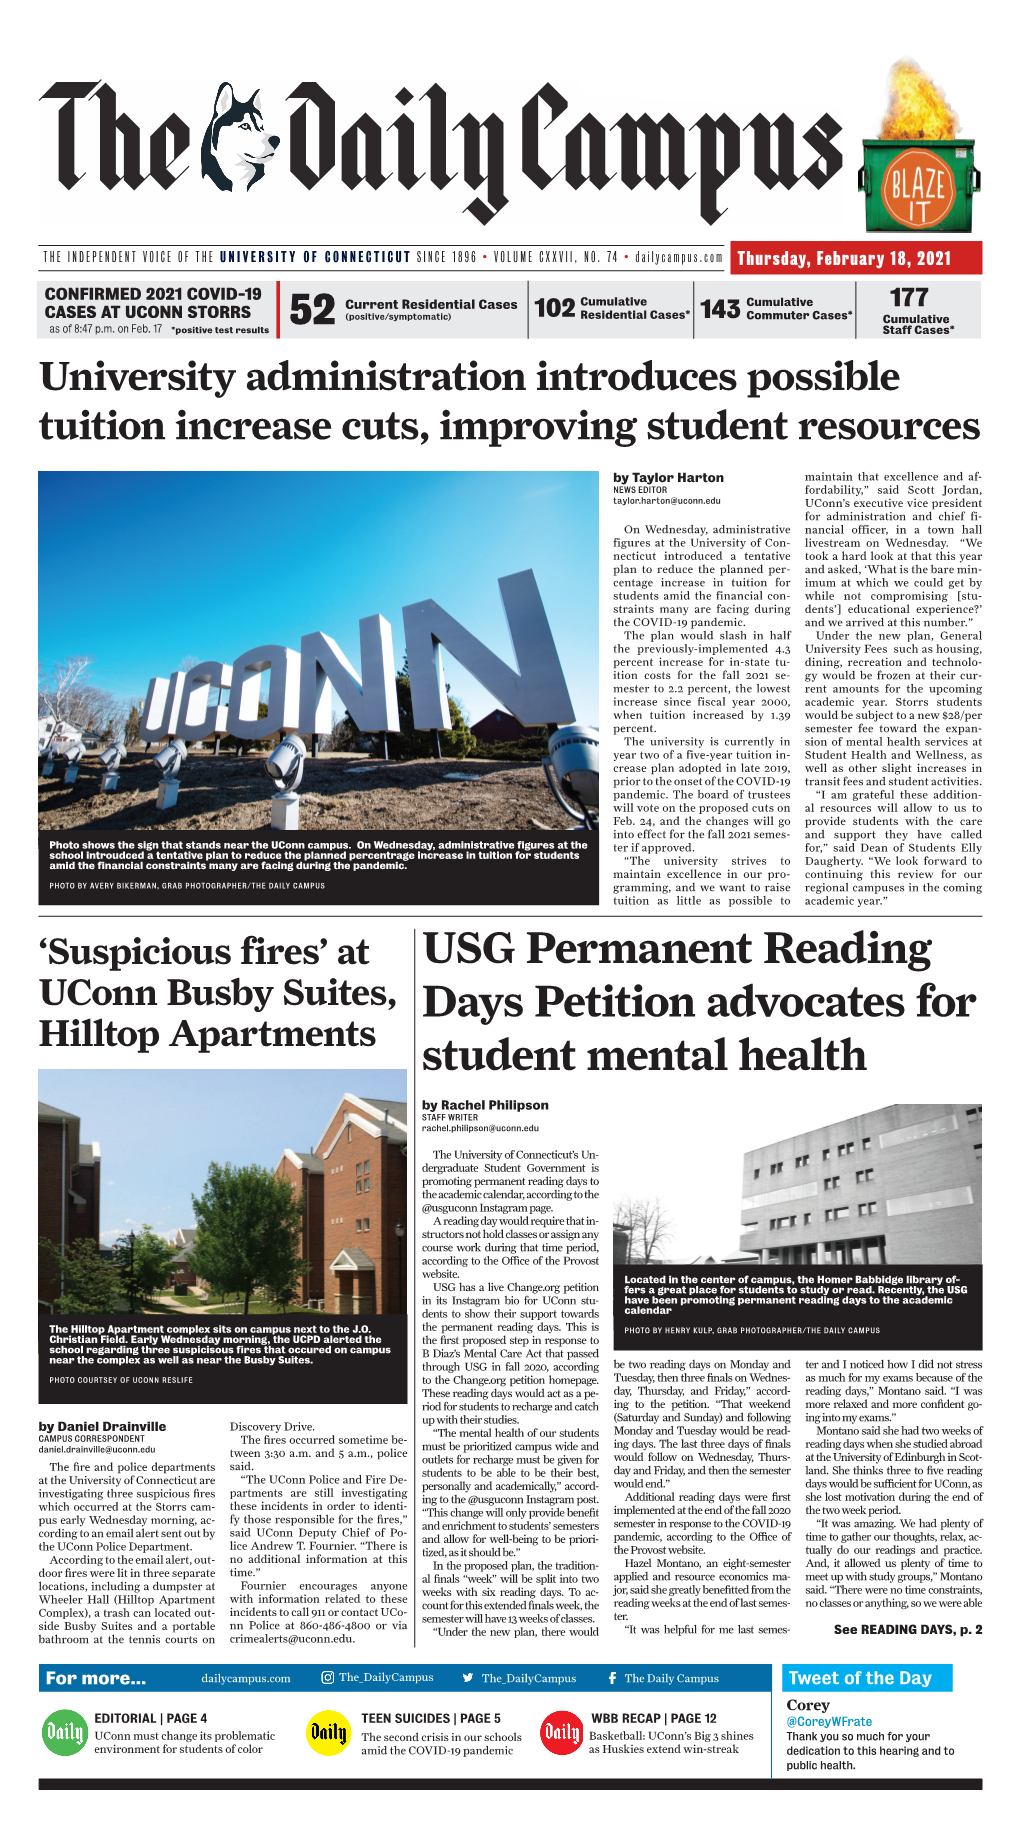 USG Permanent Reading Days Petition Advocates for Student